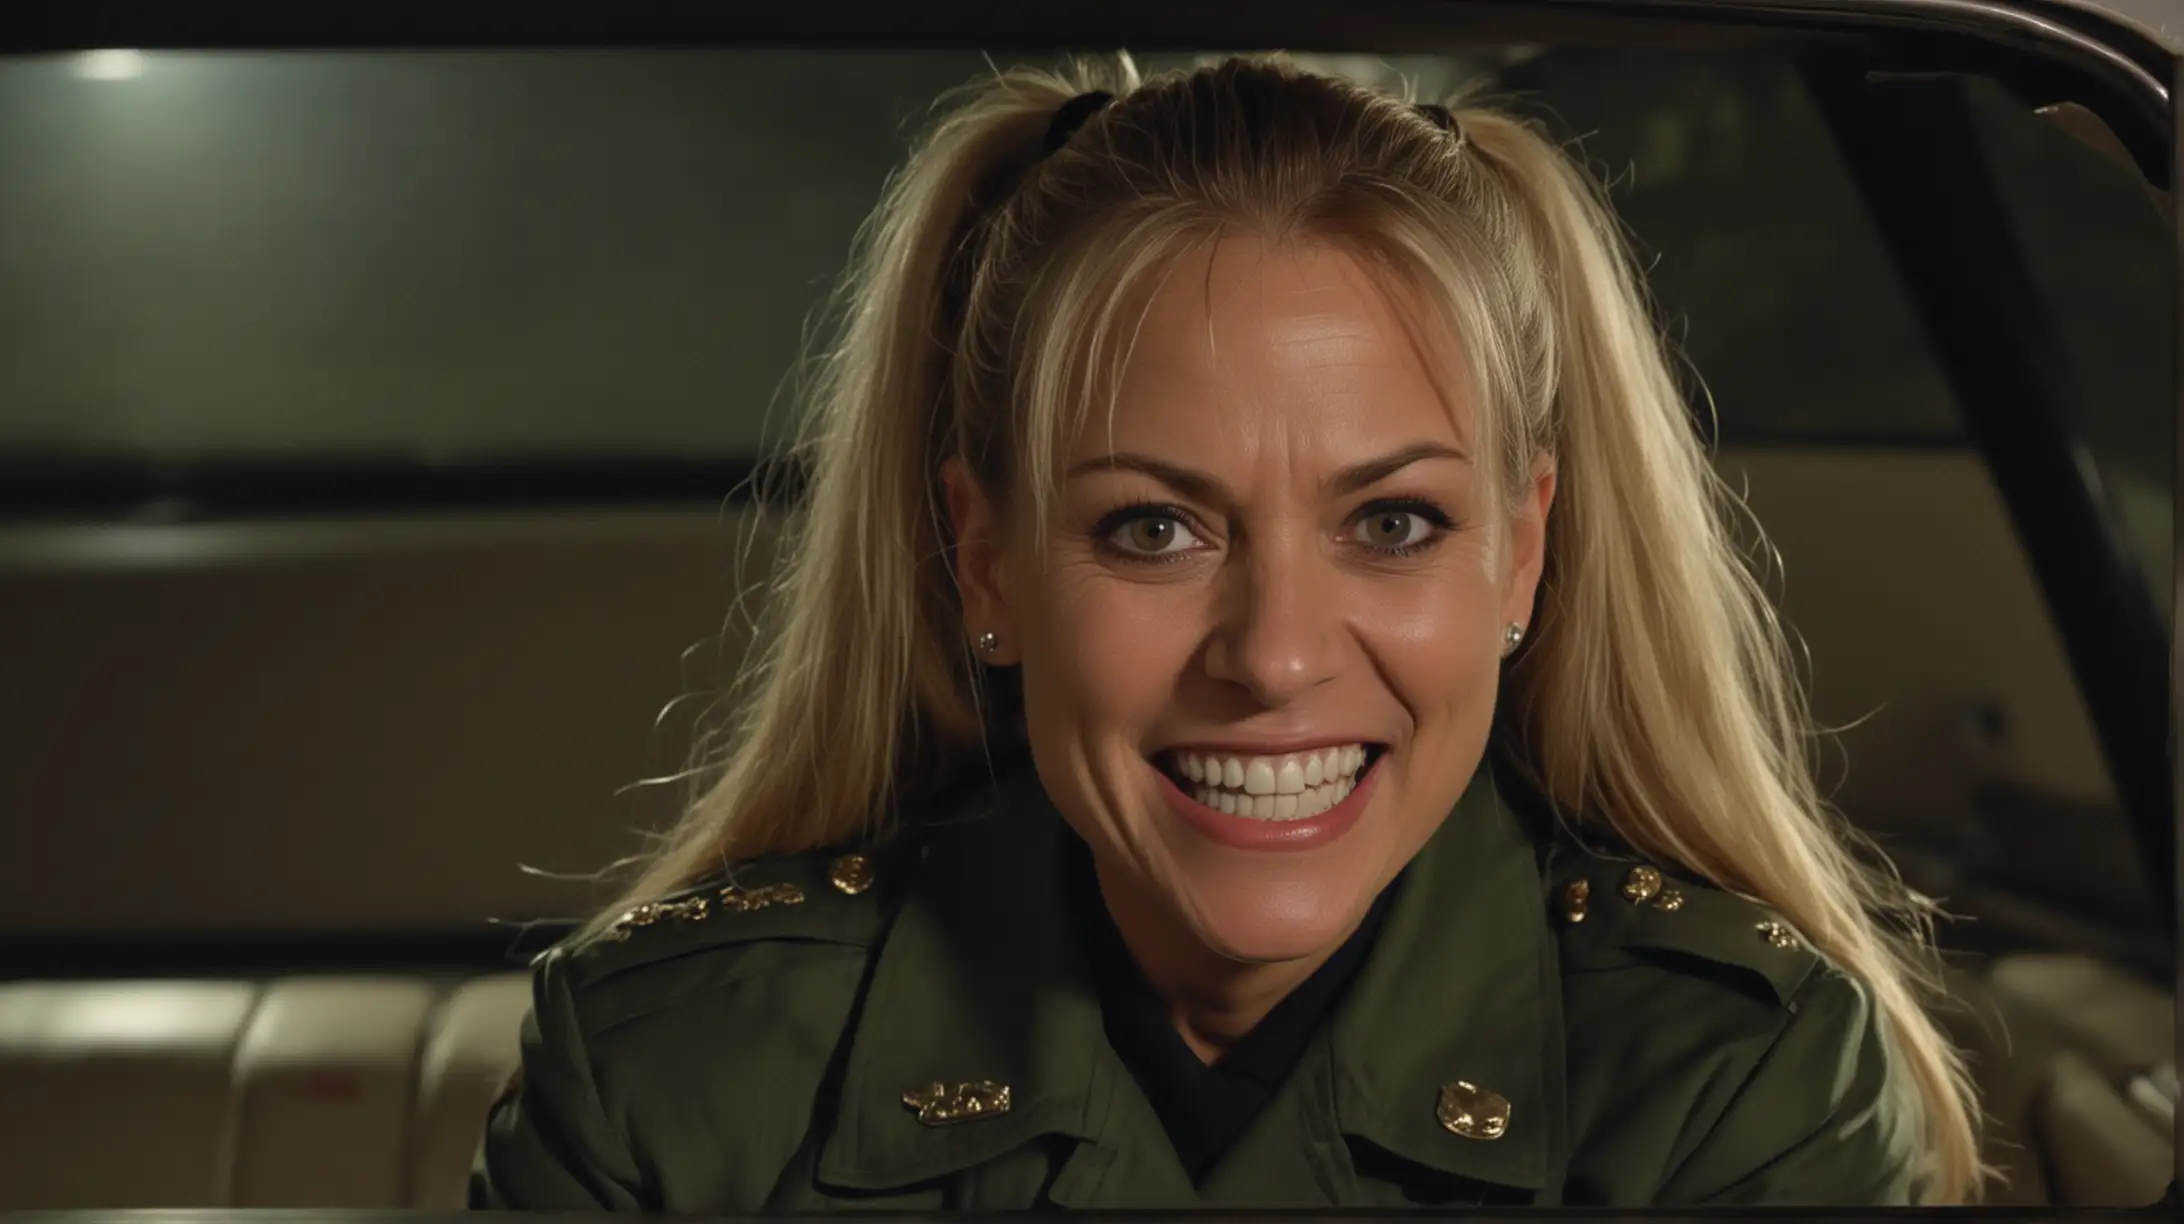 high ranking military woman, 55 yo, blonde, tight pony tail, military jacket, psych smile, angry, mad, furious, psycho eyes, backseat in presidential car, night, 70s crime movie style, super panavision 70